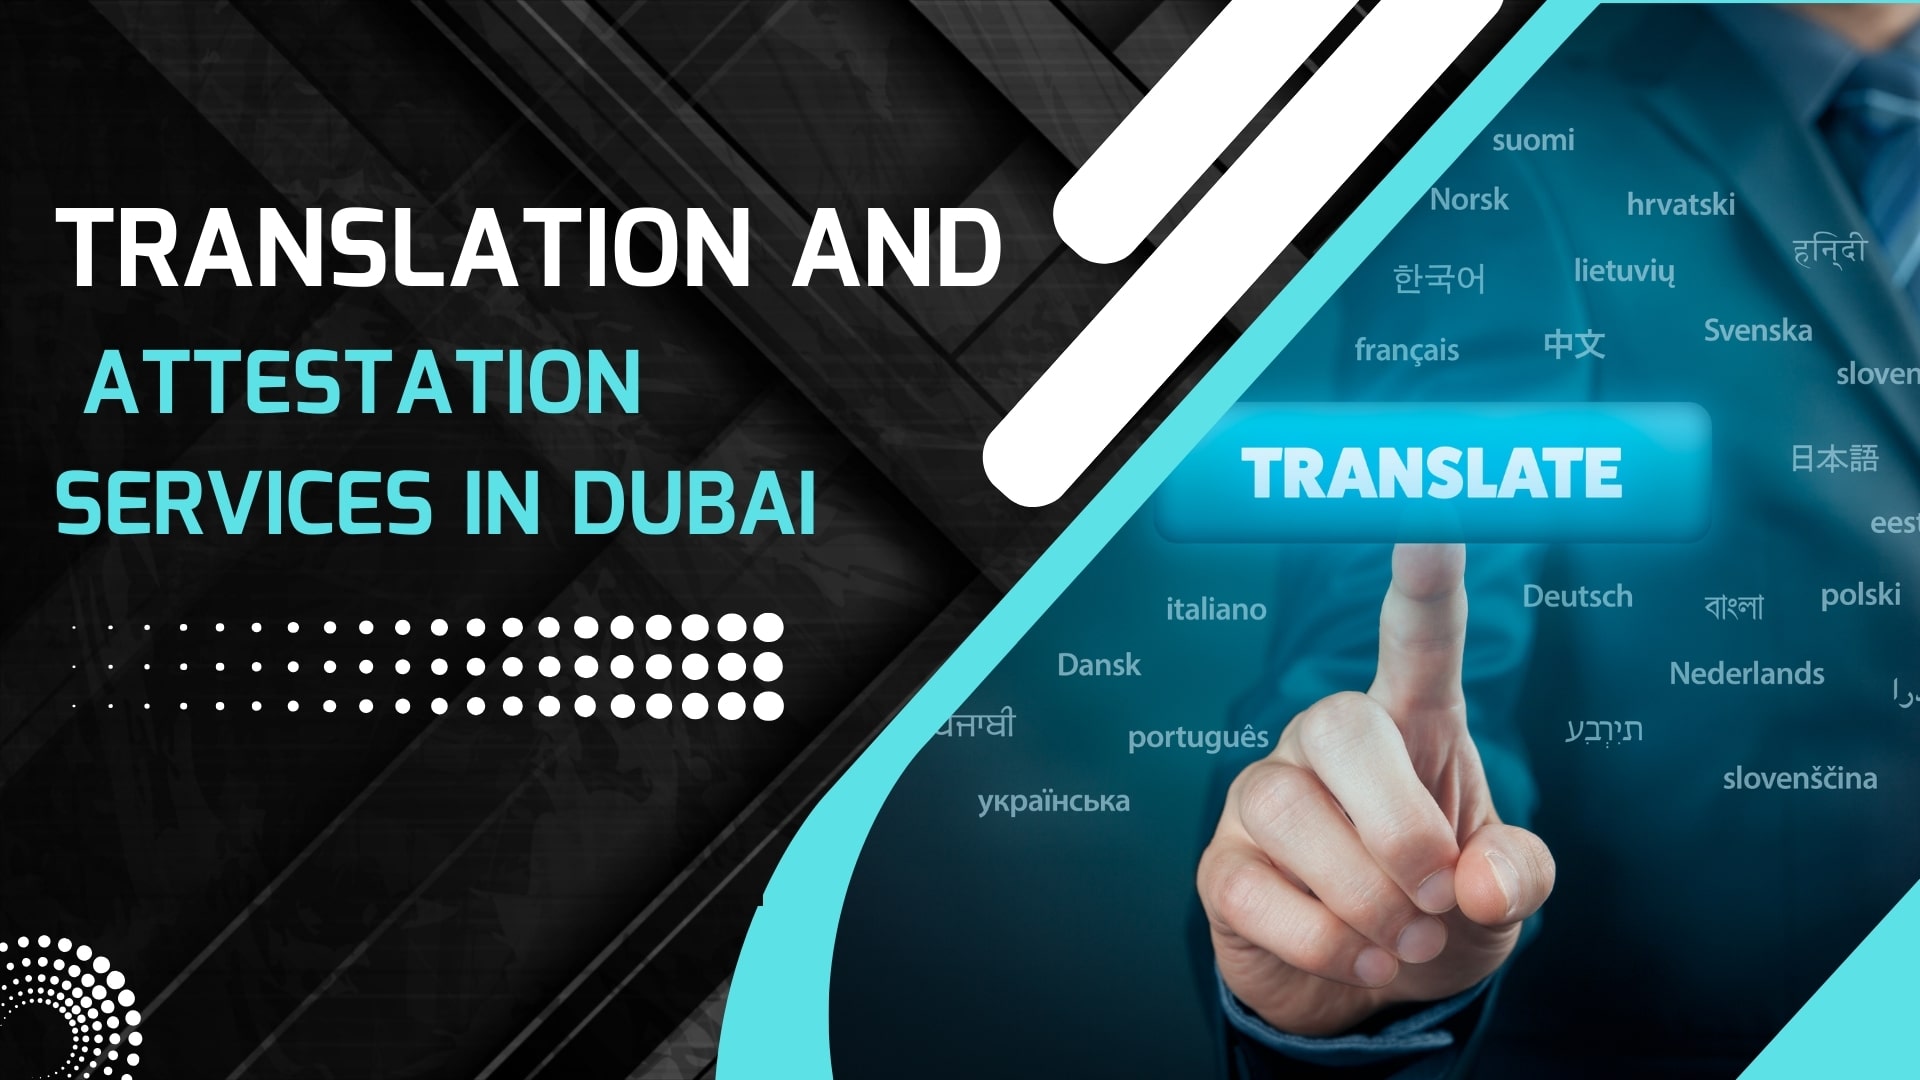 Translation and Attestation Services in Dubai